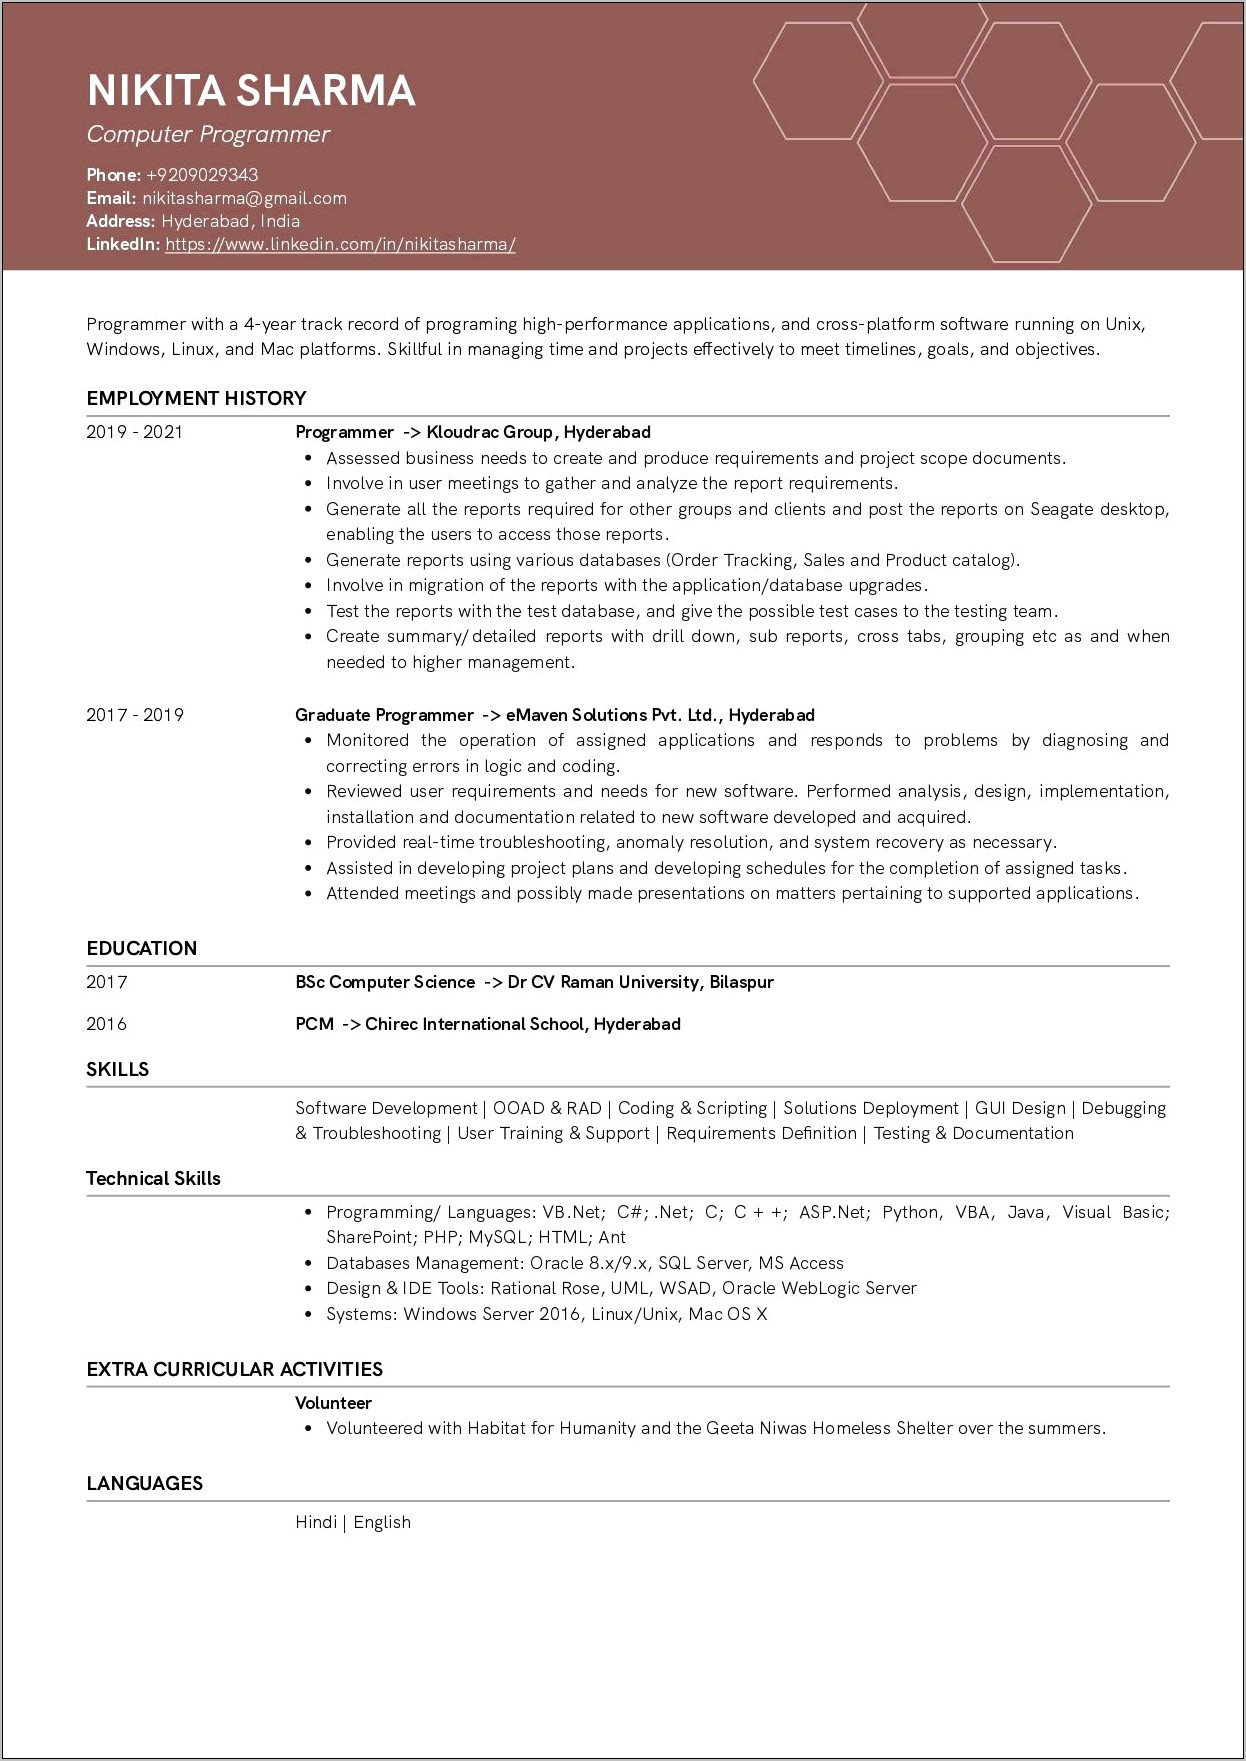 Homeless Initiative Manager Resume Sample